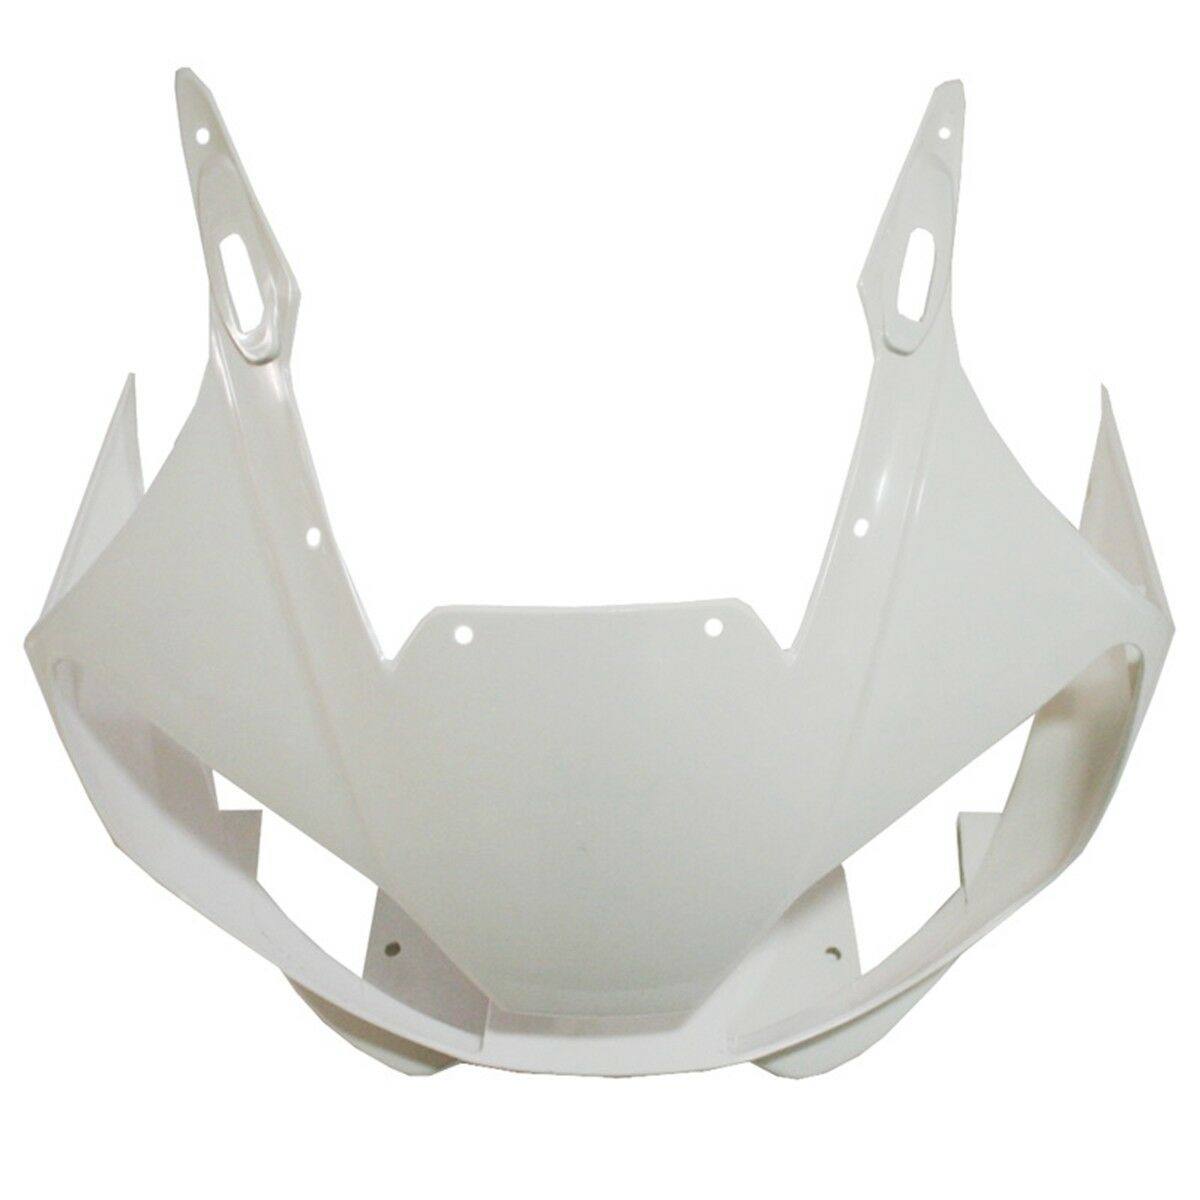 Unpainted Upper Front Fairing Nose Cowl Fit For Yamaha YZF-R6 YZF R6 1998-2002 - Moto Life Products